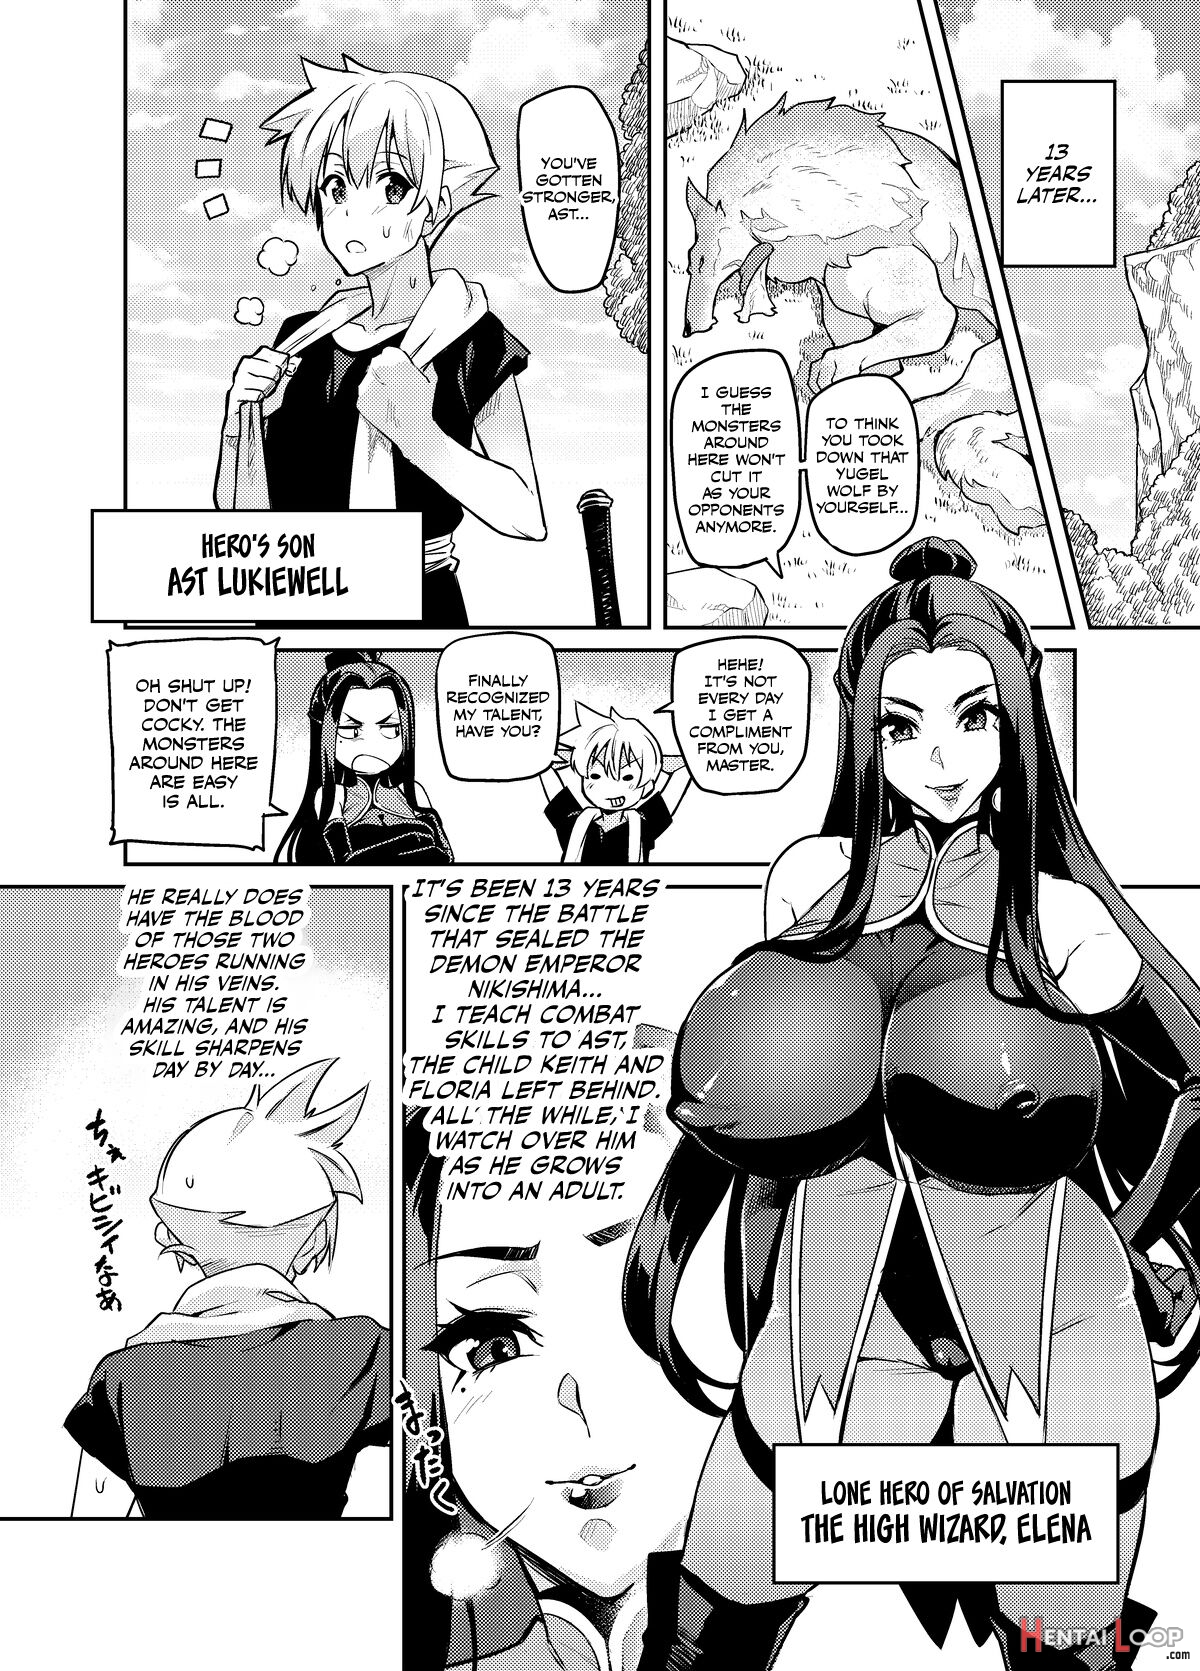 High Wizard Elena ~the Witch Who Fell In Love With The Child Entrusted To Her By Her Past Sweetheart~ Chapter 1-13, Ex page 4